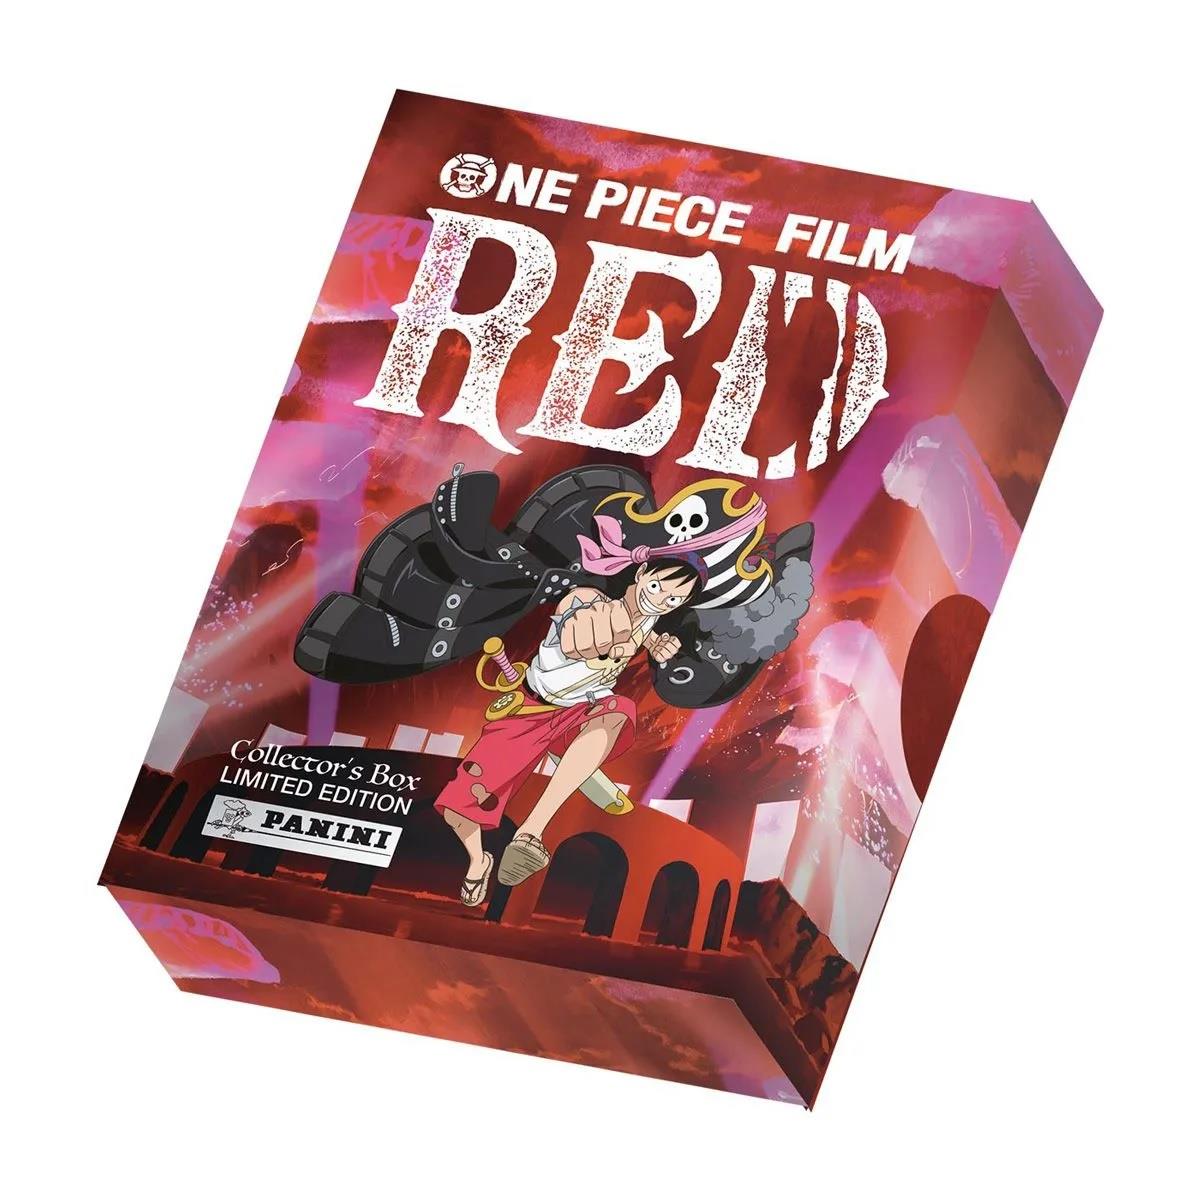 ONE PIECE: RED LIMITED EDITION COLLECTOR'S BOX